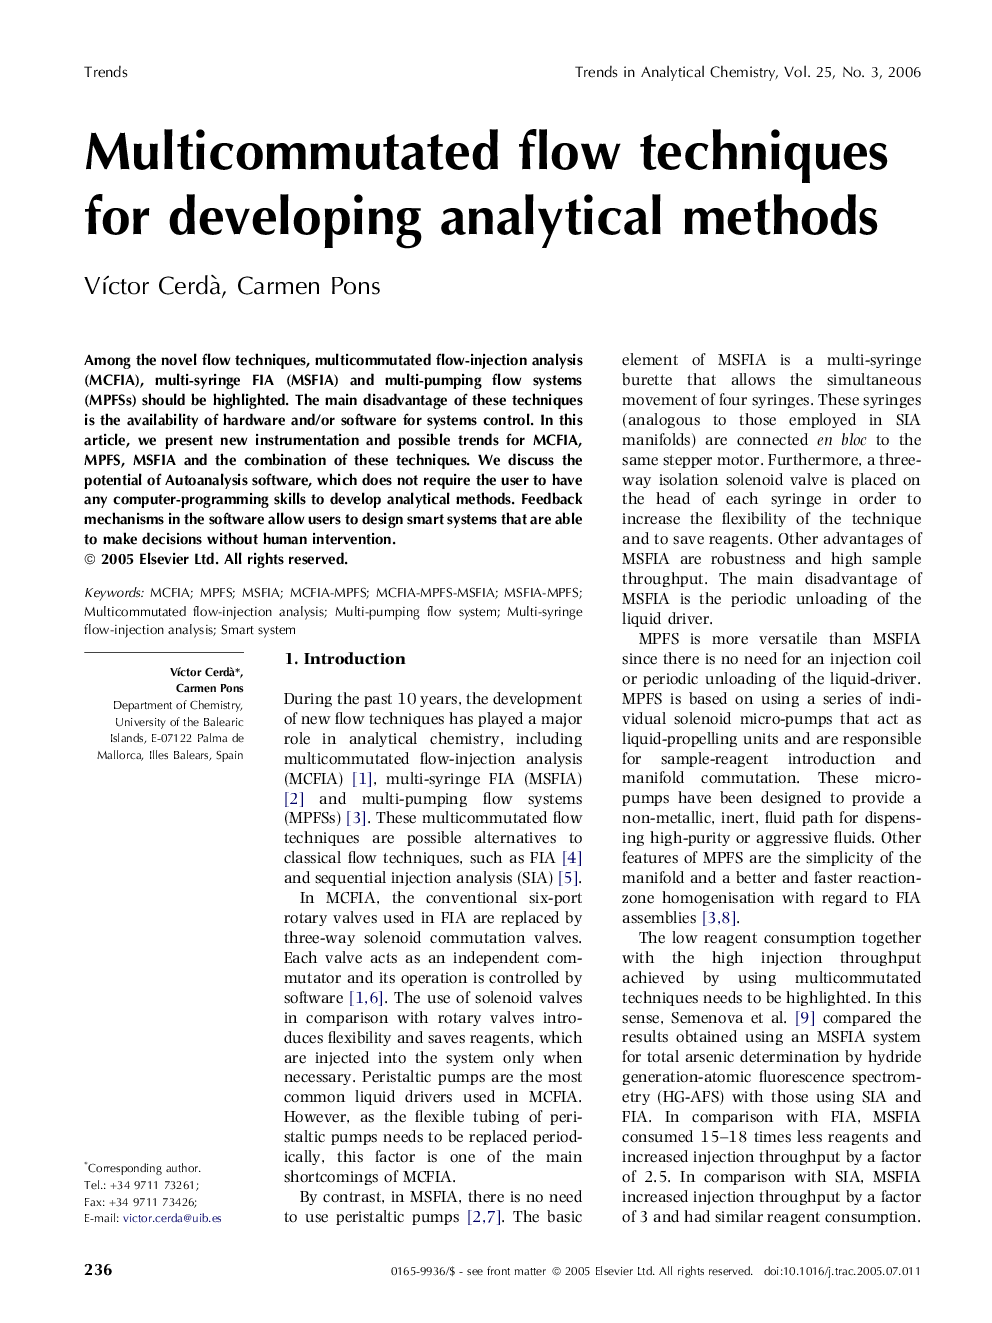 Multicommutated flow techniques for developing analytical methods